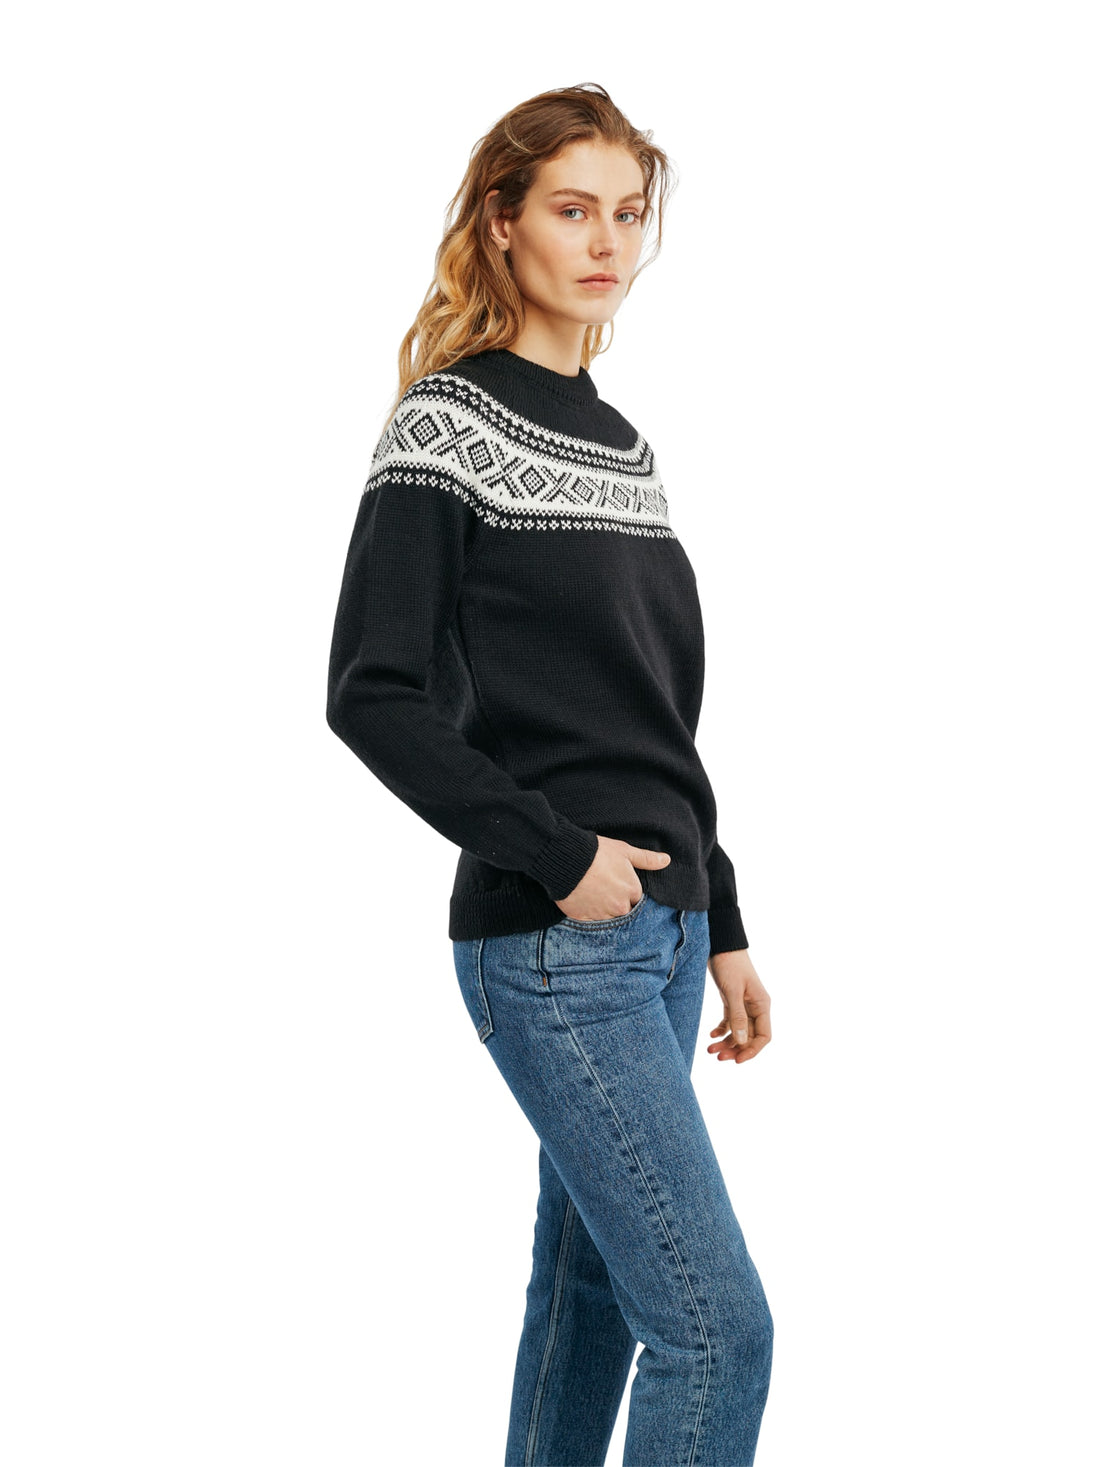 Dale of Norway - Vagsoy Women's Sweater - Black